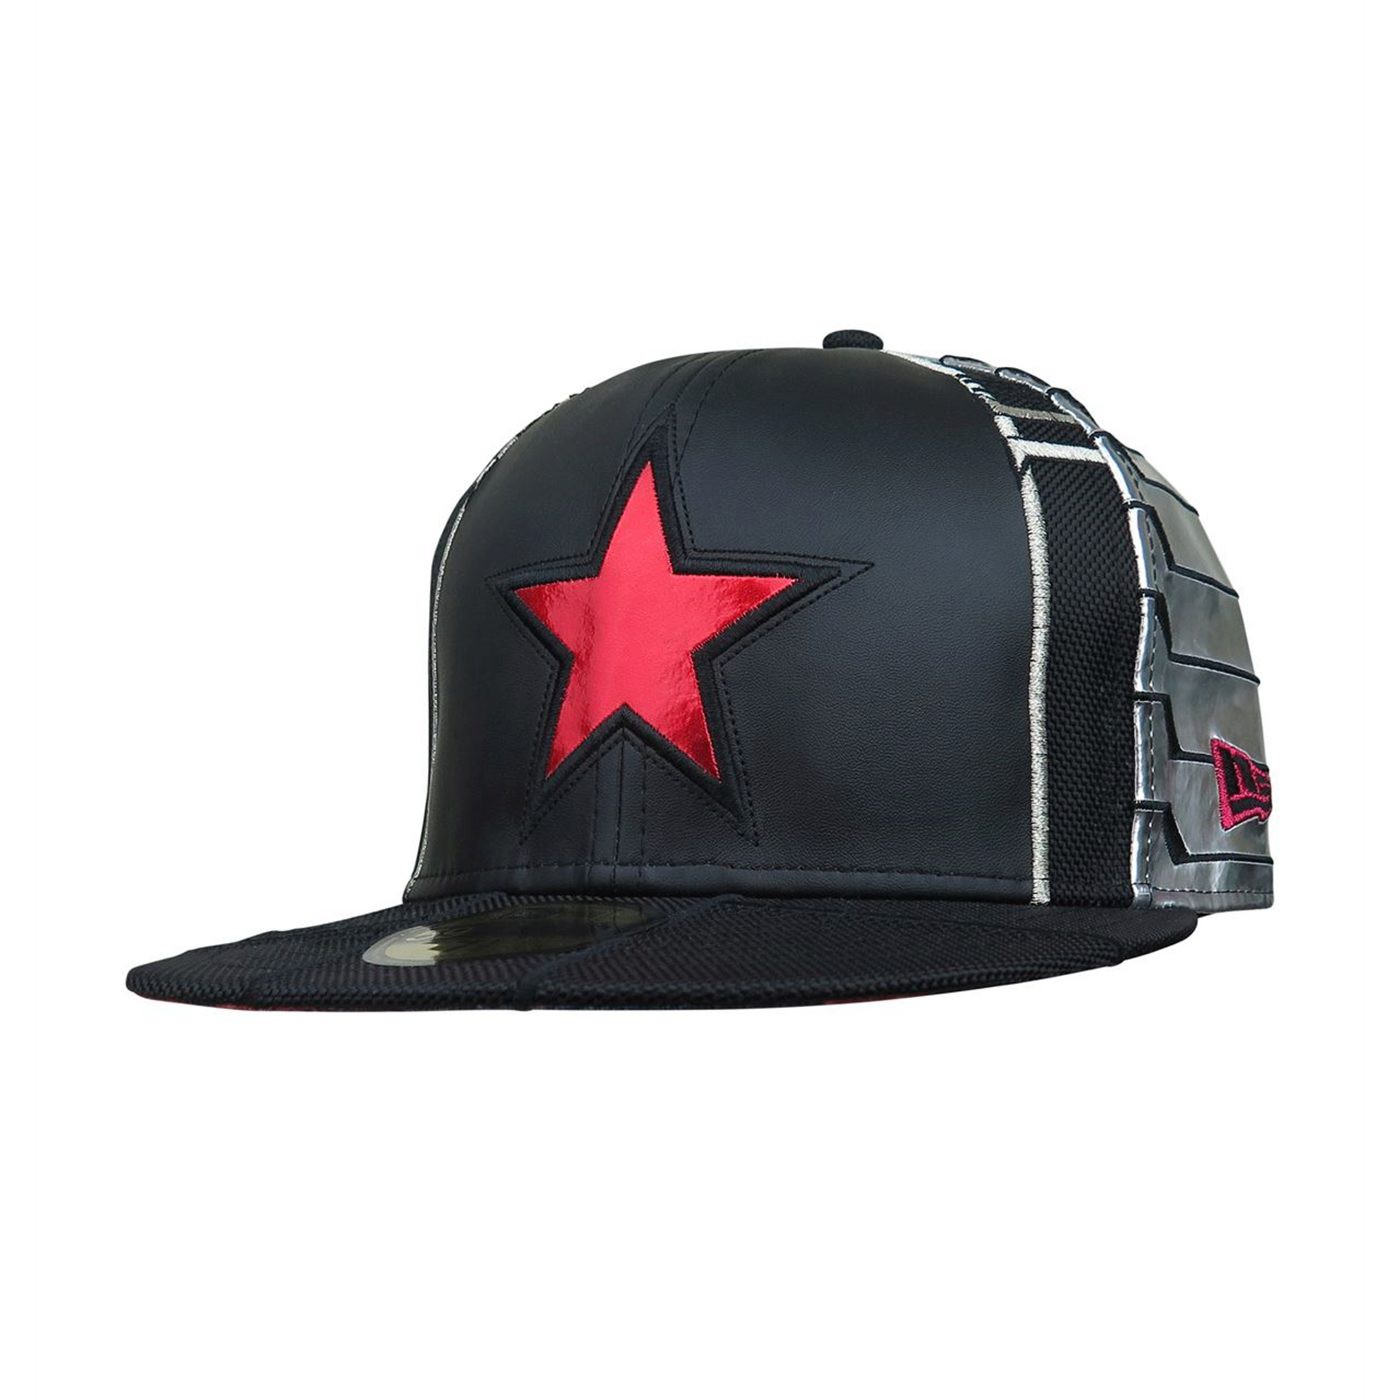 Winter Soldier Armor New Era Fitted Hat